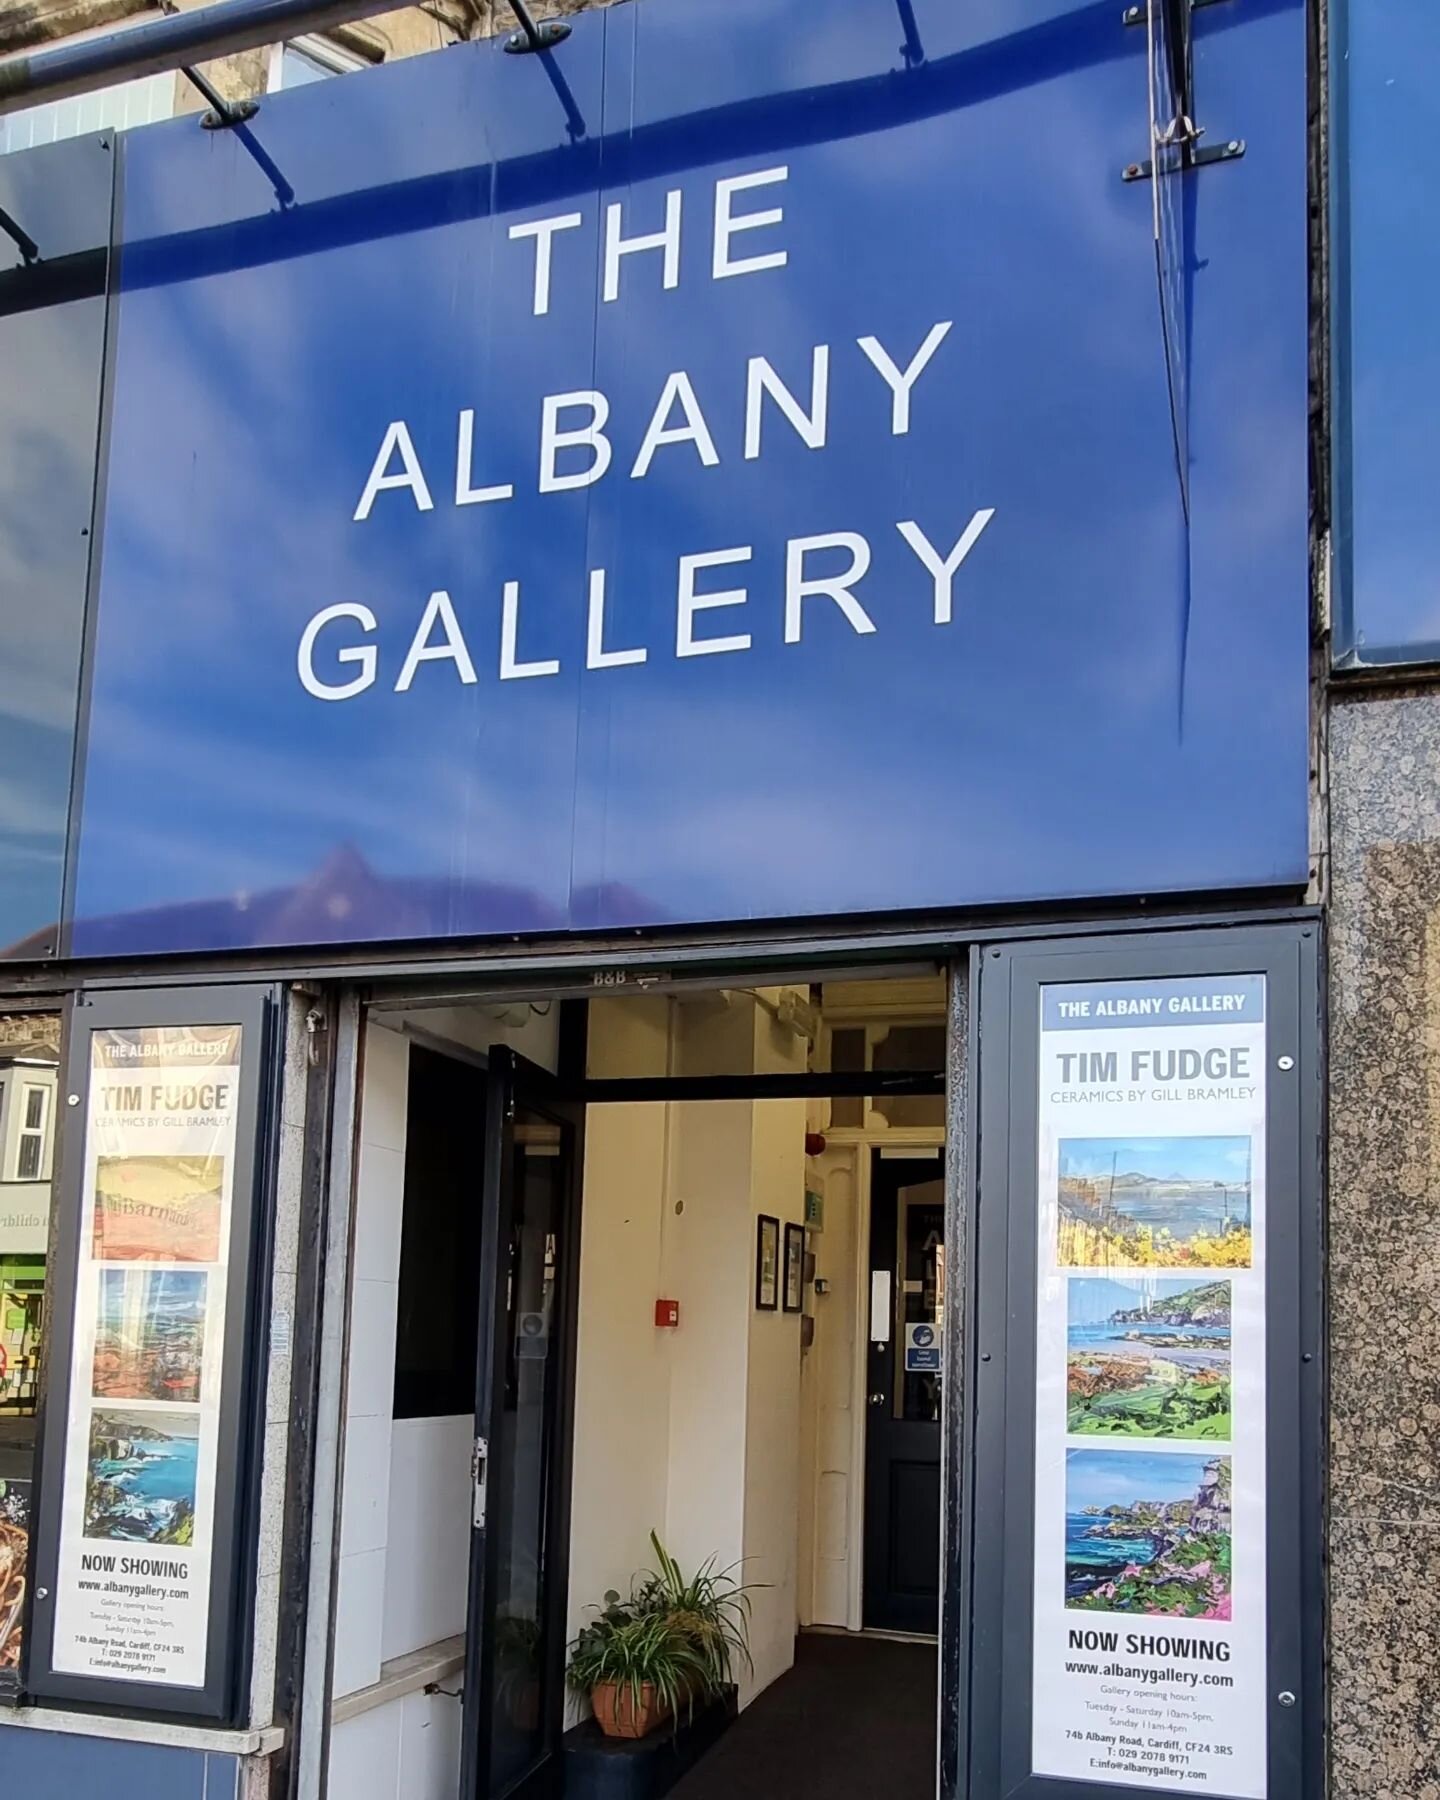 I'm excited to have delivered some of my largest paintings to the wonderful @albanygallery in Cardiff - to be shown for sale as part of the forthcoming Winter show (alongside many other artists' work) running from 11th November to 9th January.

Do co